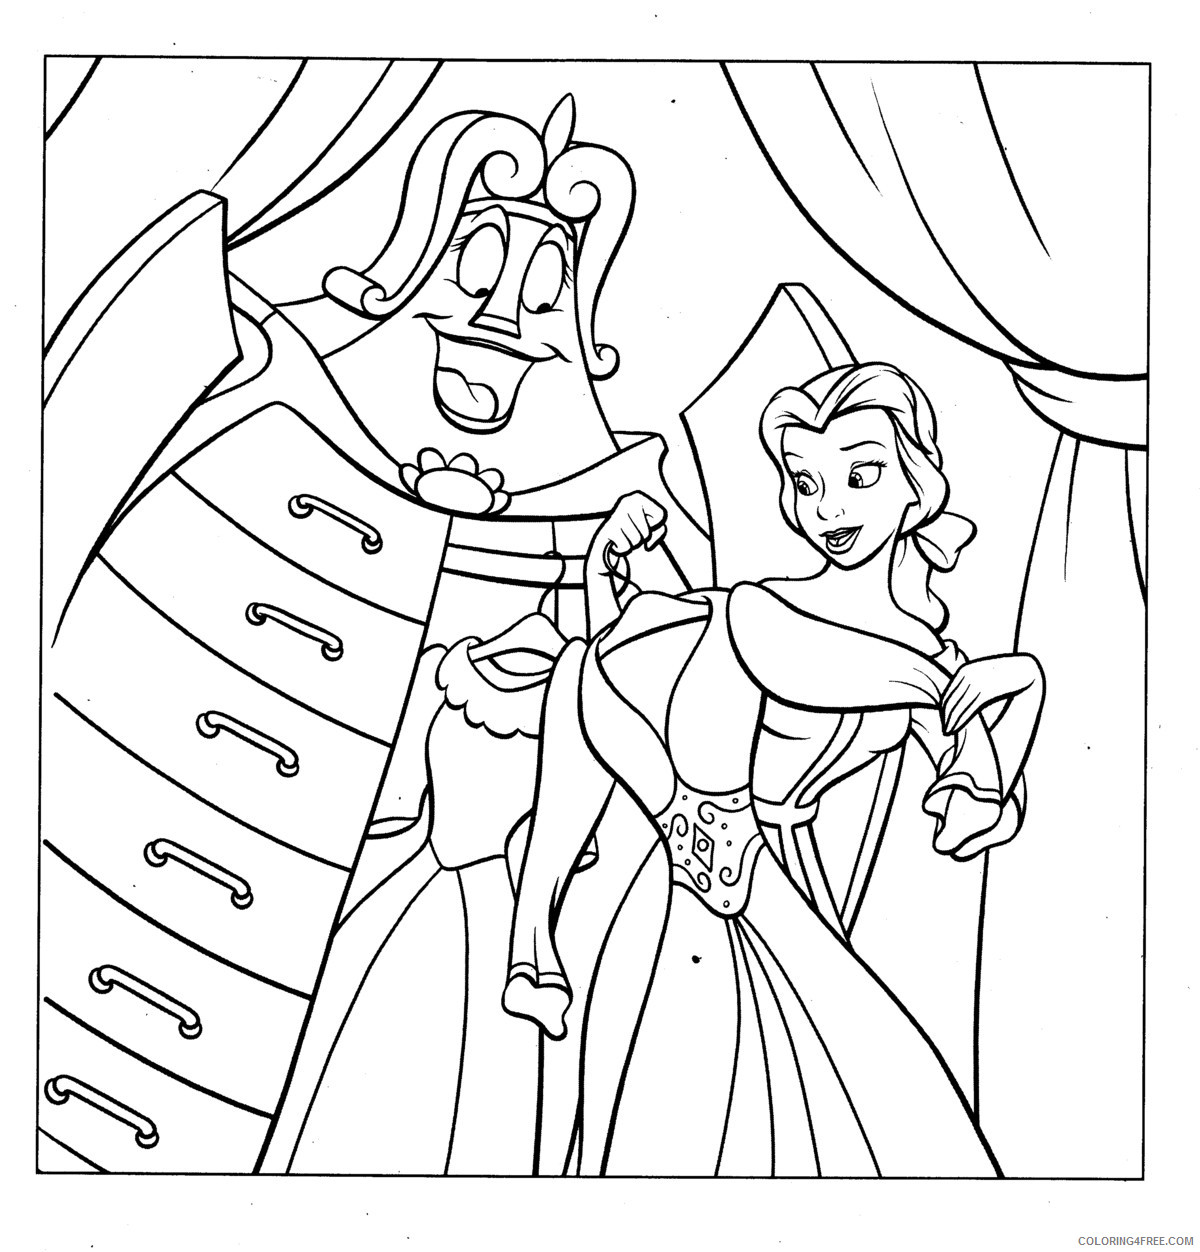 Princess Belle Coloring Pages Cartoons Belle Princess Printable 2020 5100 Coloring4free